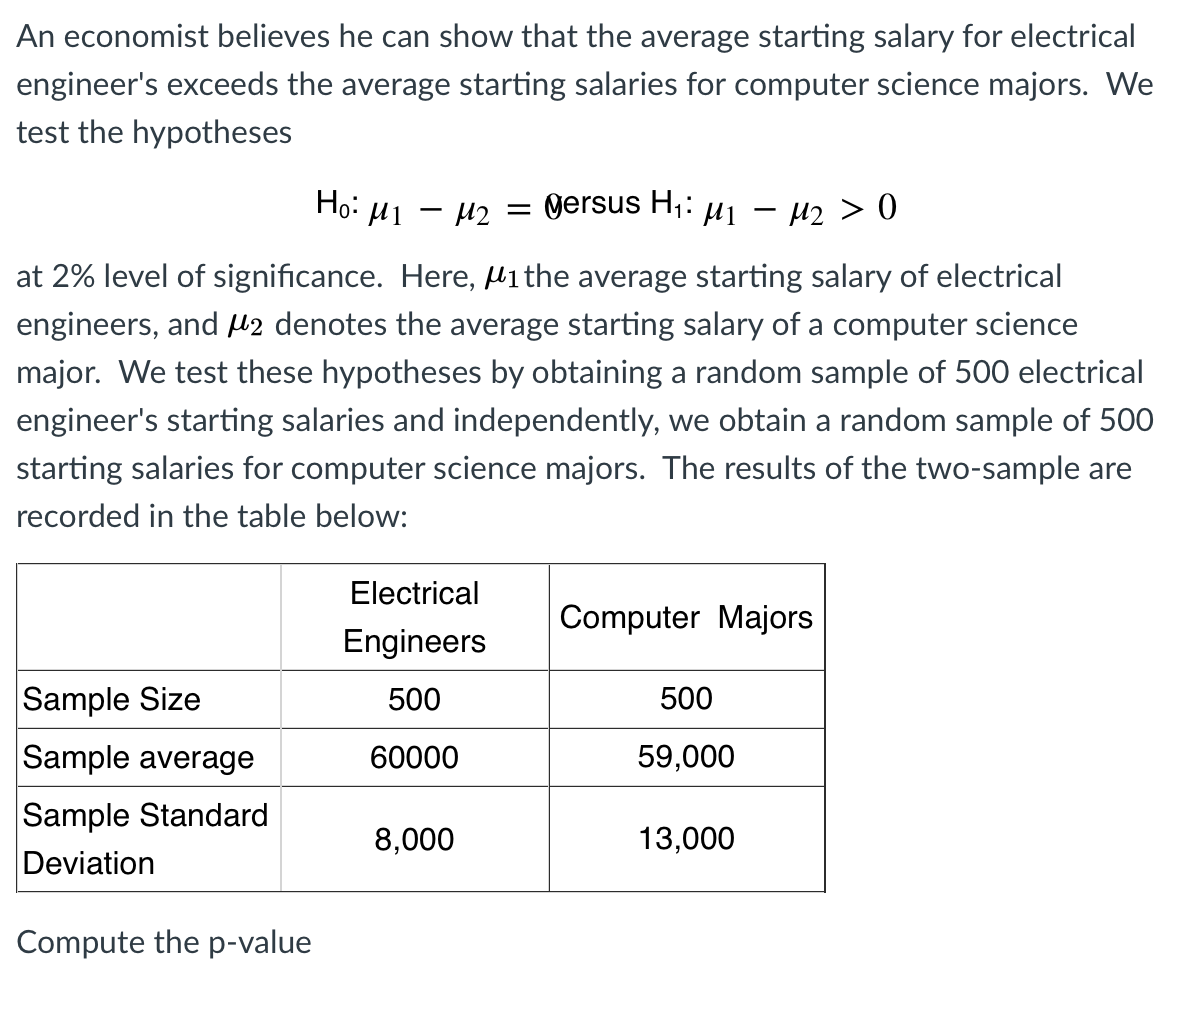 An economist believes he can show that the average starting salary for electrical
engineer's exceeds the average starting salaries for computer science majors. We
test the hypotheses
Ho: µ1 - 42 =
gersus H;: µ1 – H2 > 0
at 2% level of significance. Here, lithe average starting salary of electrical
engineers, and Mz denotes the average starting salary of a computer science
major. We test these hypotheses by obtaining a random sample of 500 electrical
engineer's starting salaries and independently, we obtain a random sample of 500
starting salaries for computer science majors. The results of the two-sample are
recorded in the table below:
Electrical
Computer Majors
Engineers
Sample Size
500
500
Sample average
60000
59,000
Sample Standard
8,000
13,000
Deviation
Compute the p-value
